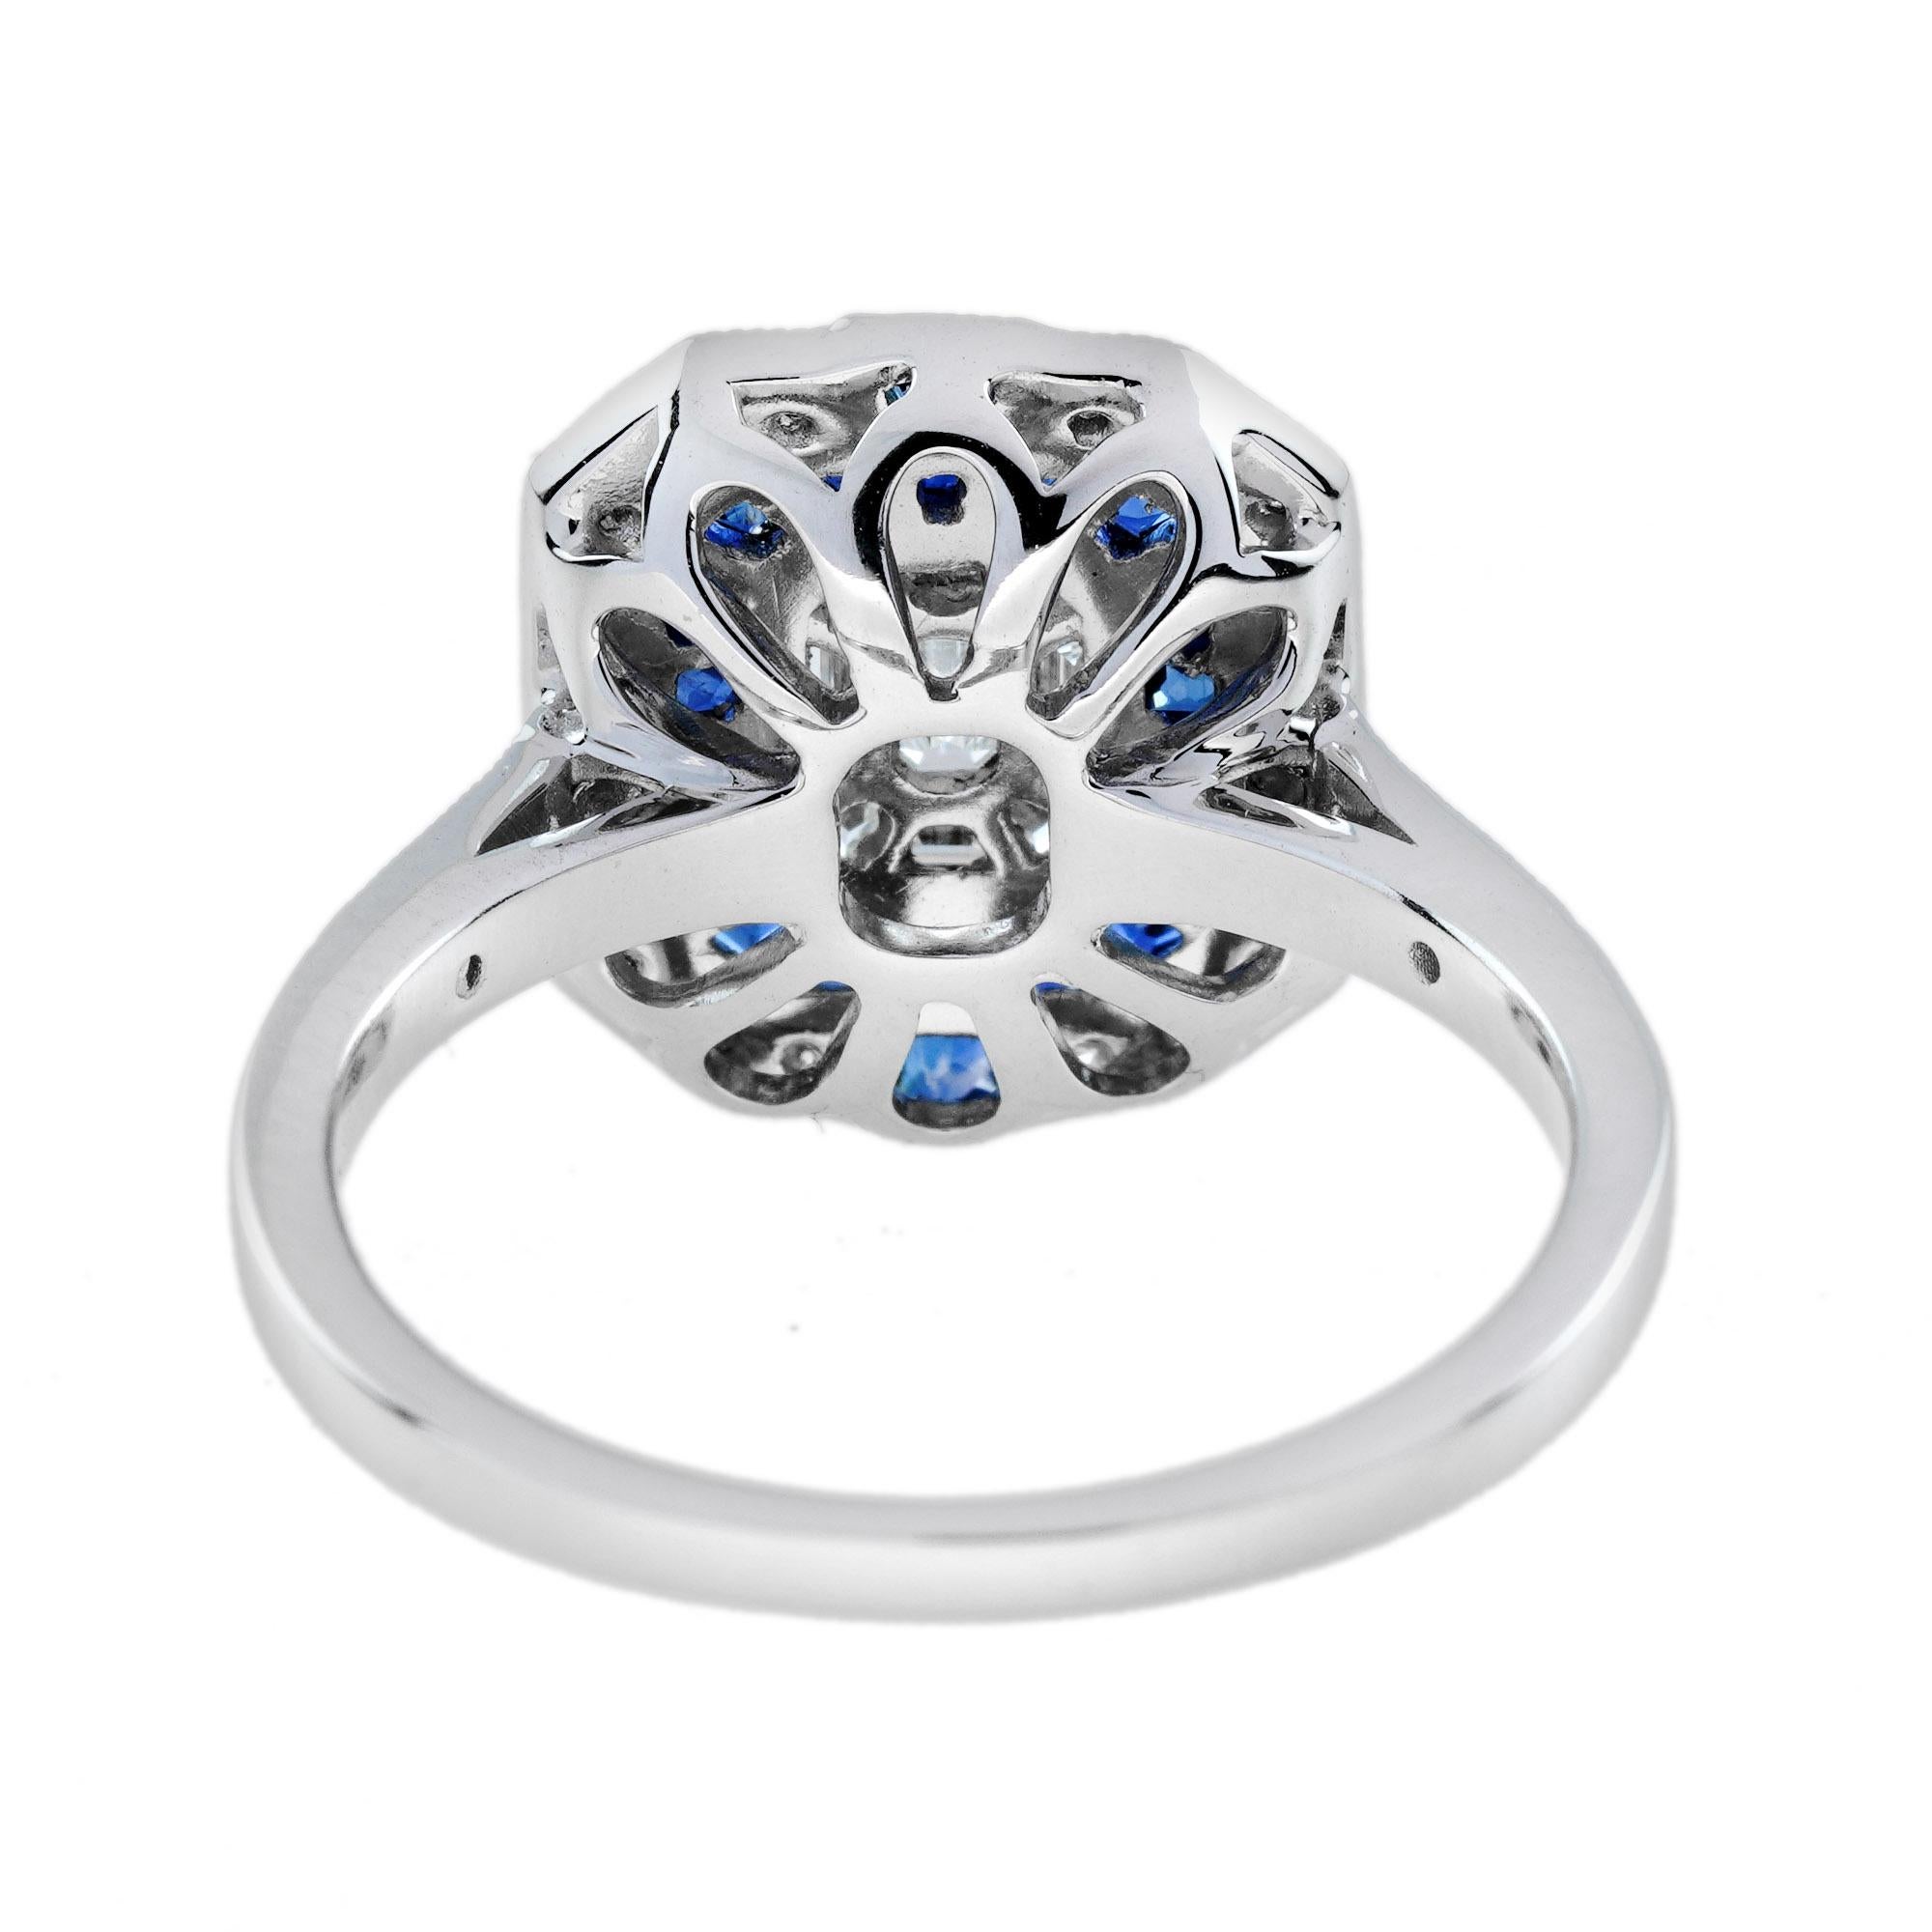 Women's Illusion Set Diamond and Blue Sapphire Art Deco Style Ring in 18K White Gold